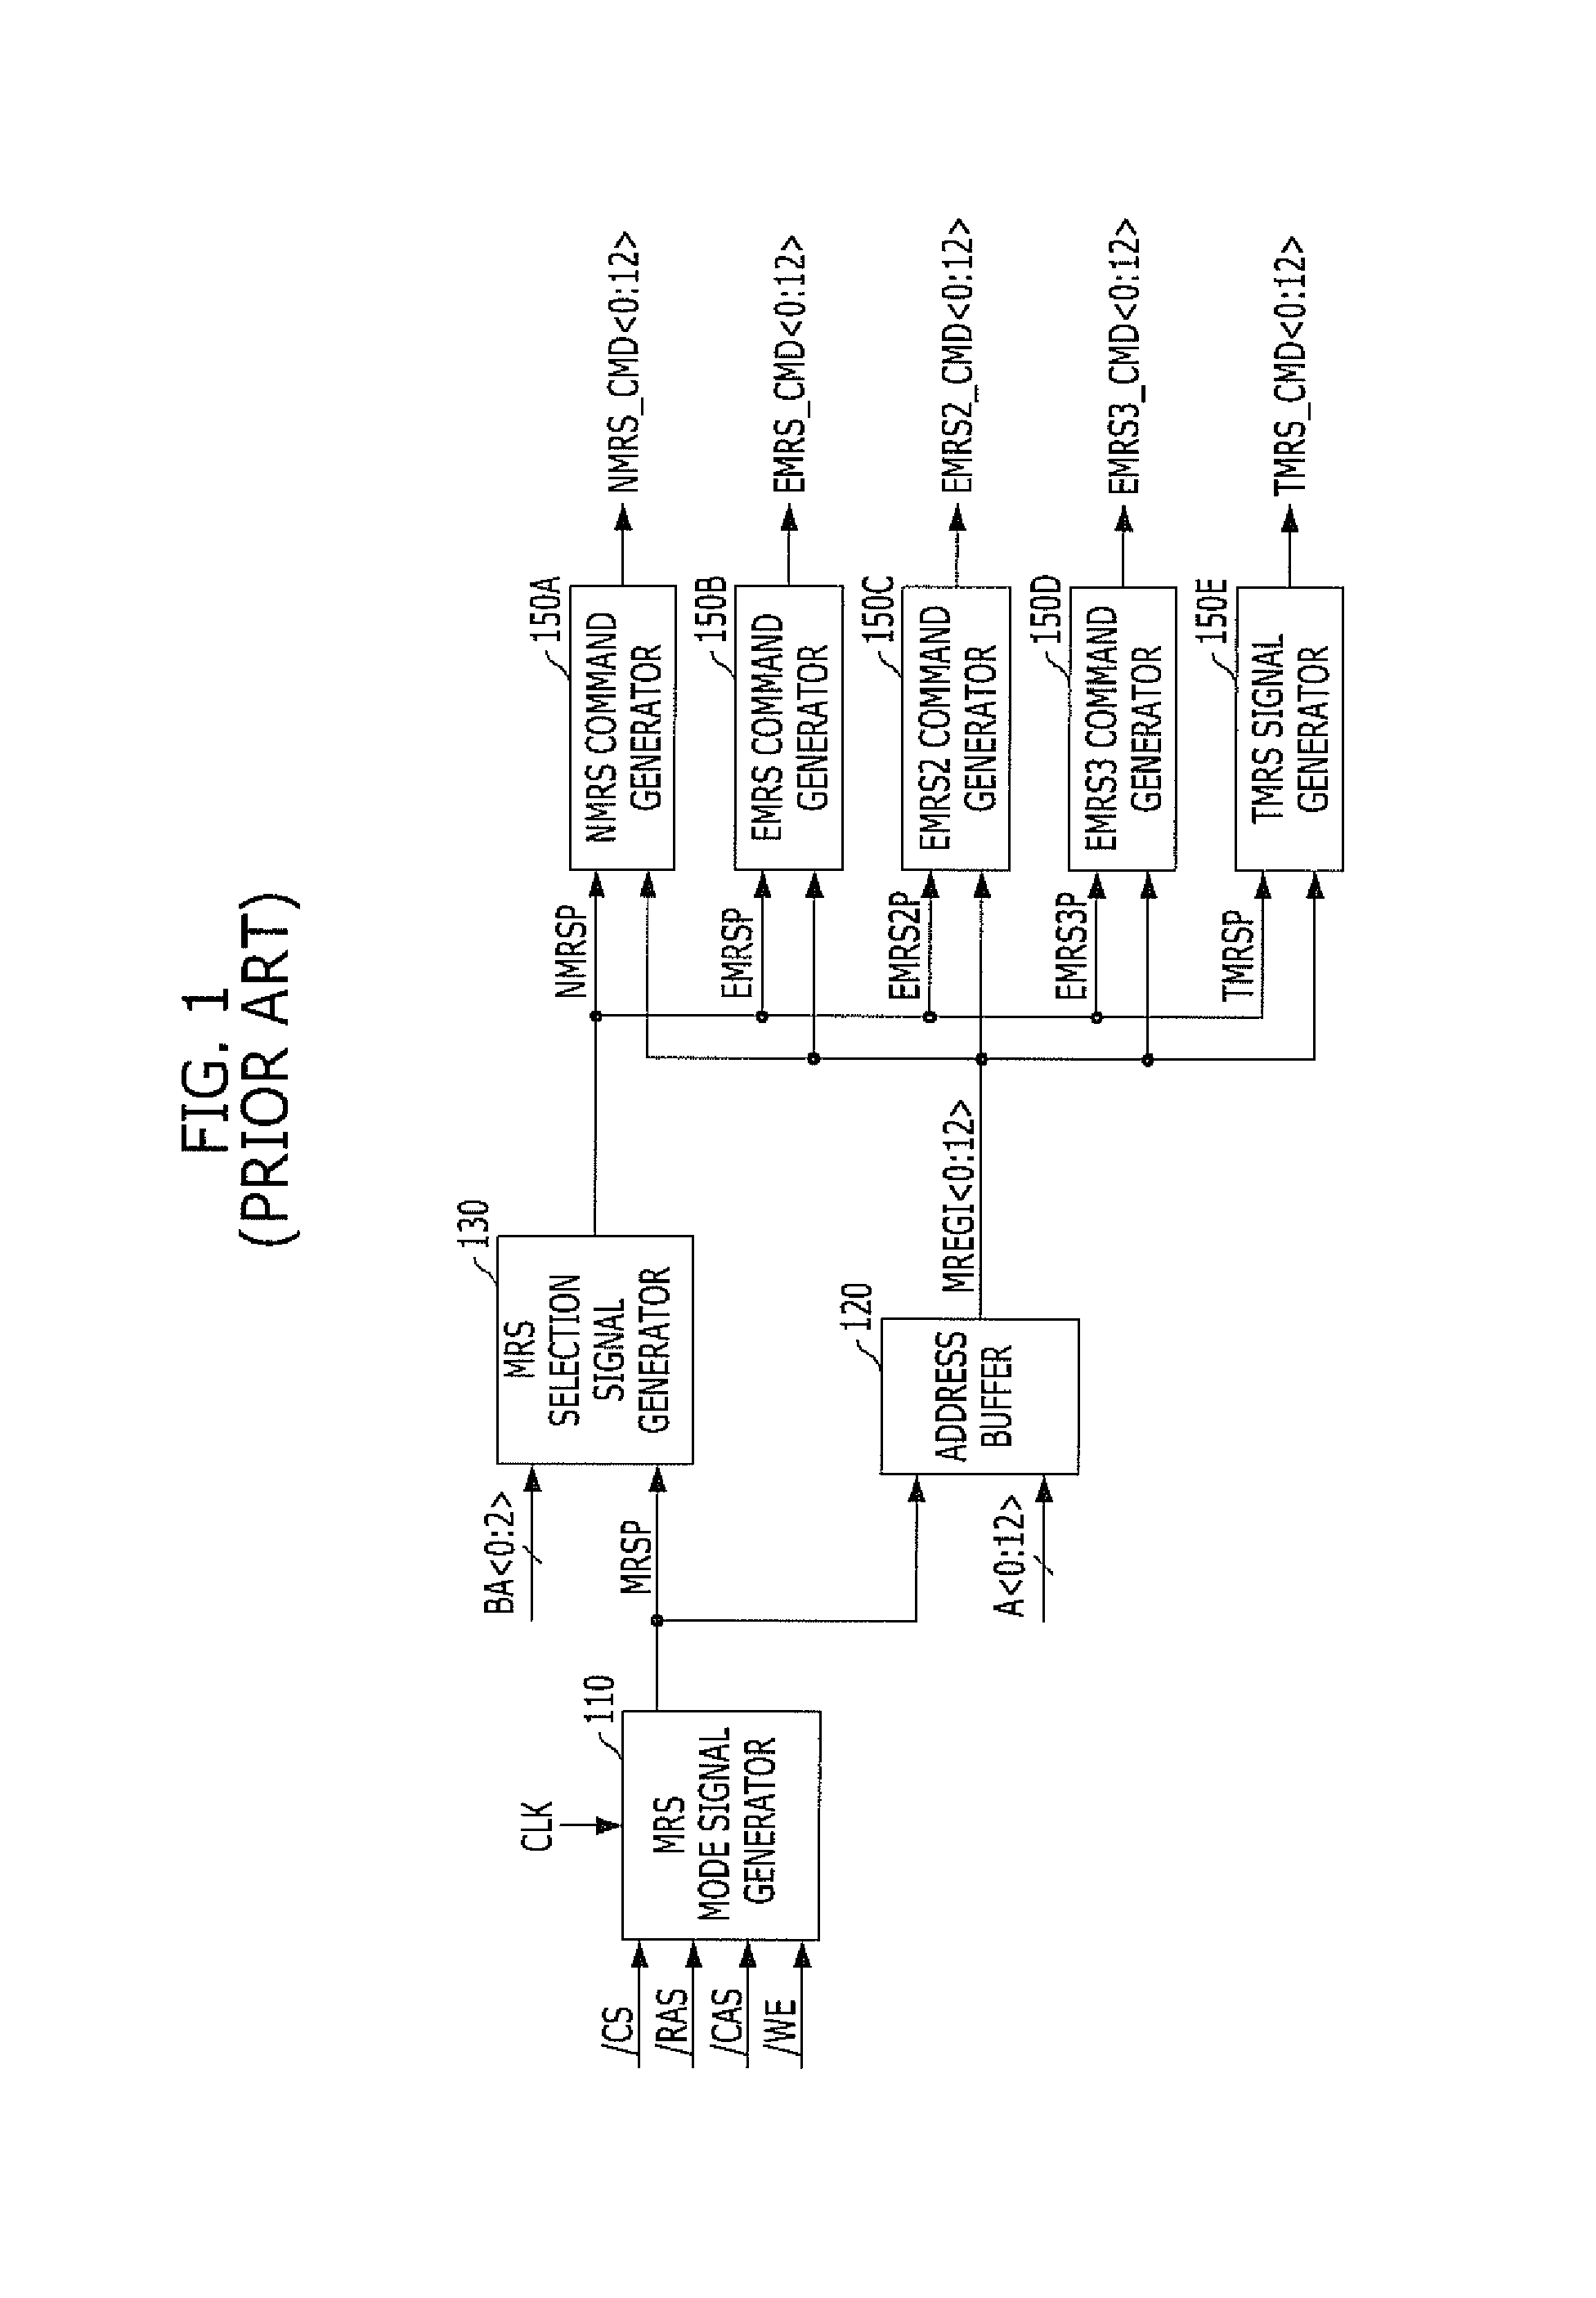 Semiconductor memory device including mode register set and method for operating the same